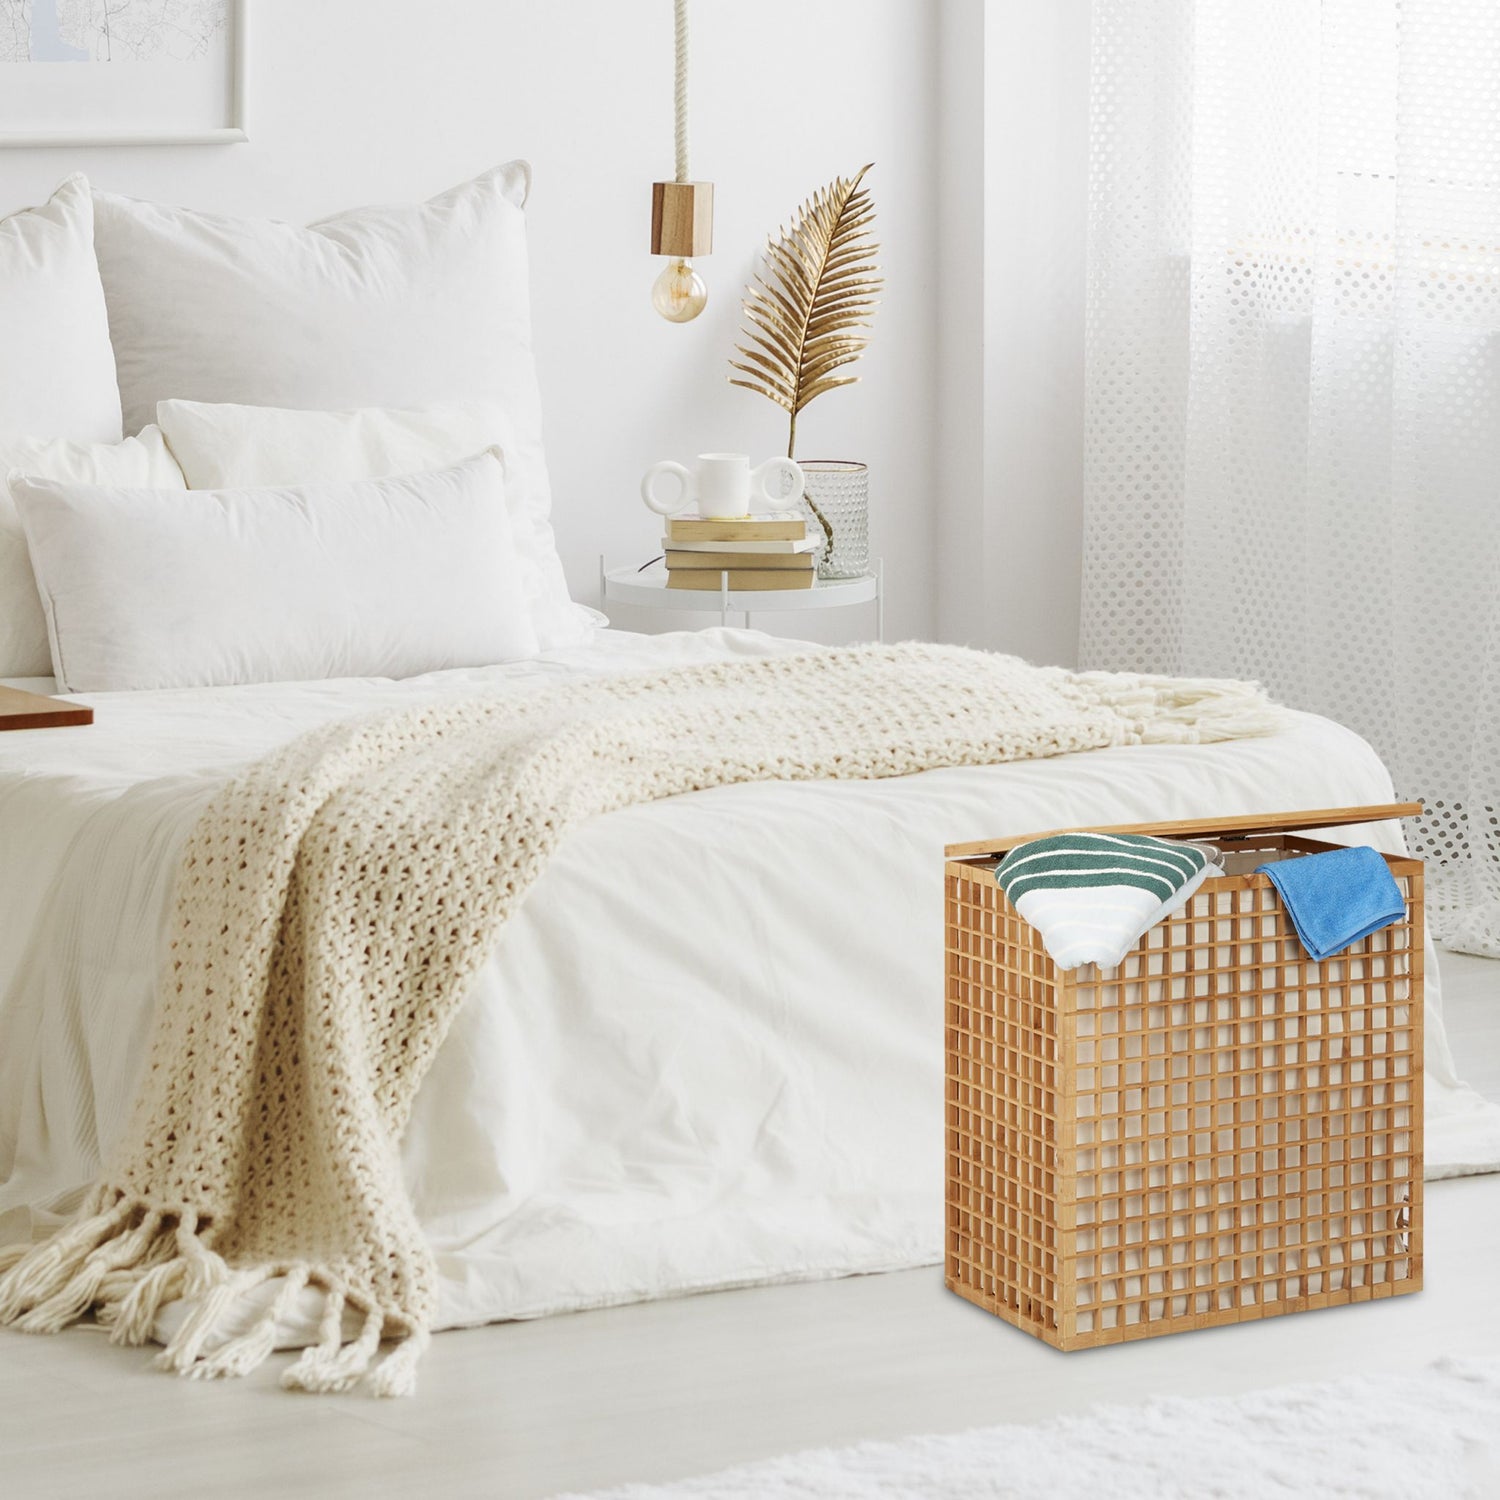 RelaxDays 2 Compartment Bamboo Laundry Hamper Bamboo Bathrooms